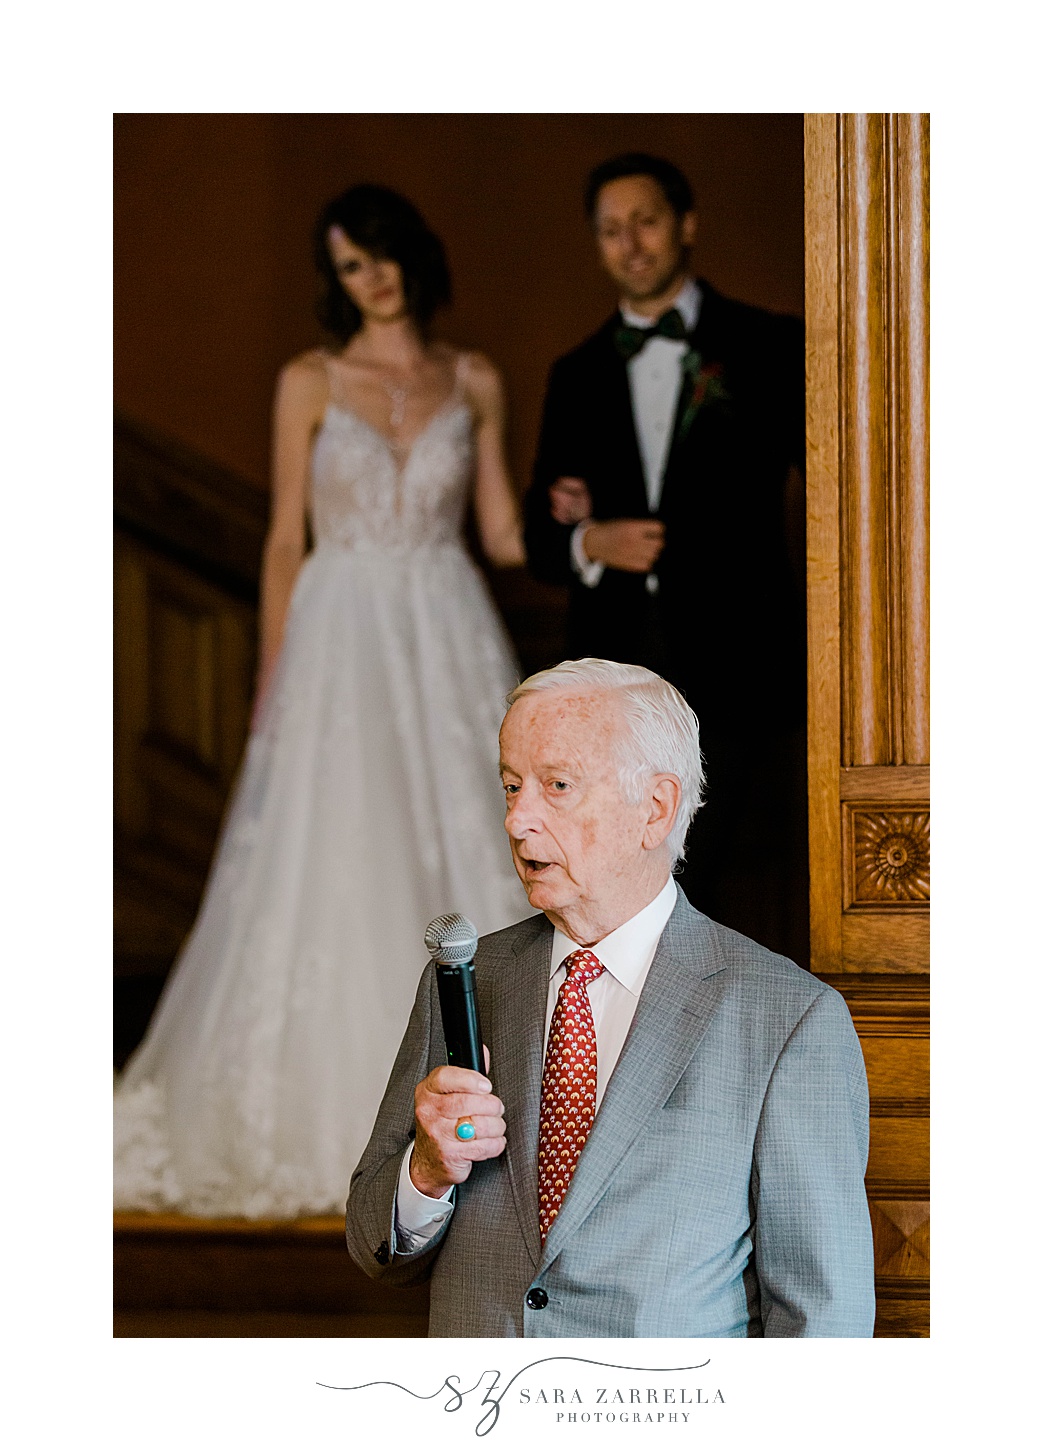 father gives speech while bride and groom look on